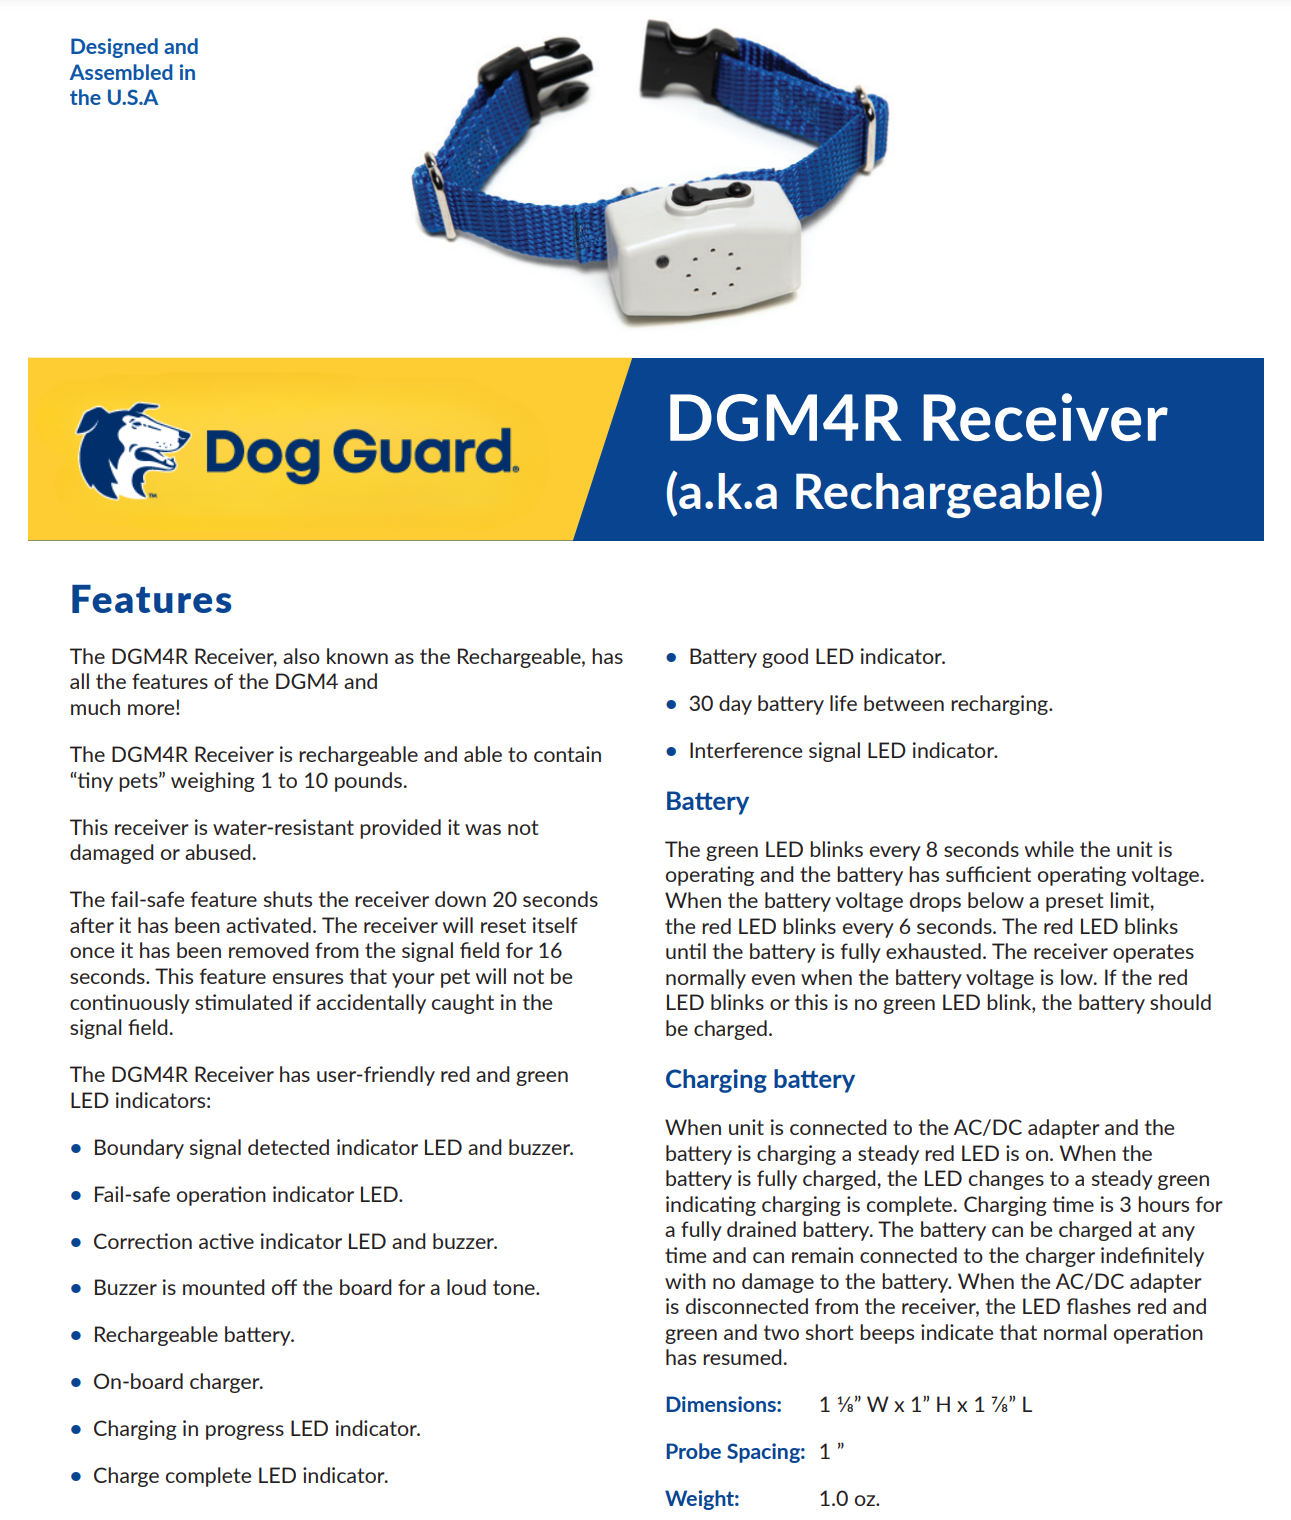 Dog Guard DGM4R Receiver (Rechargeable) with Charger